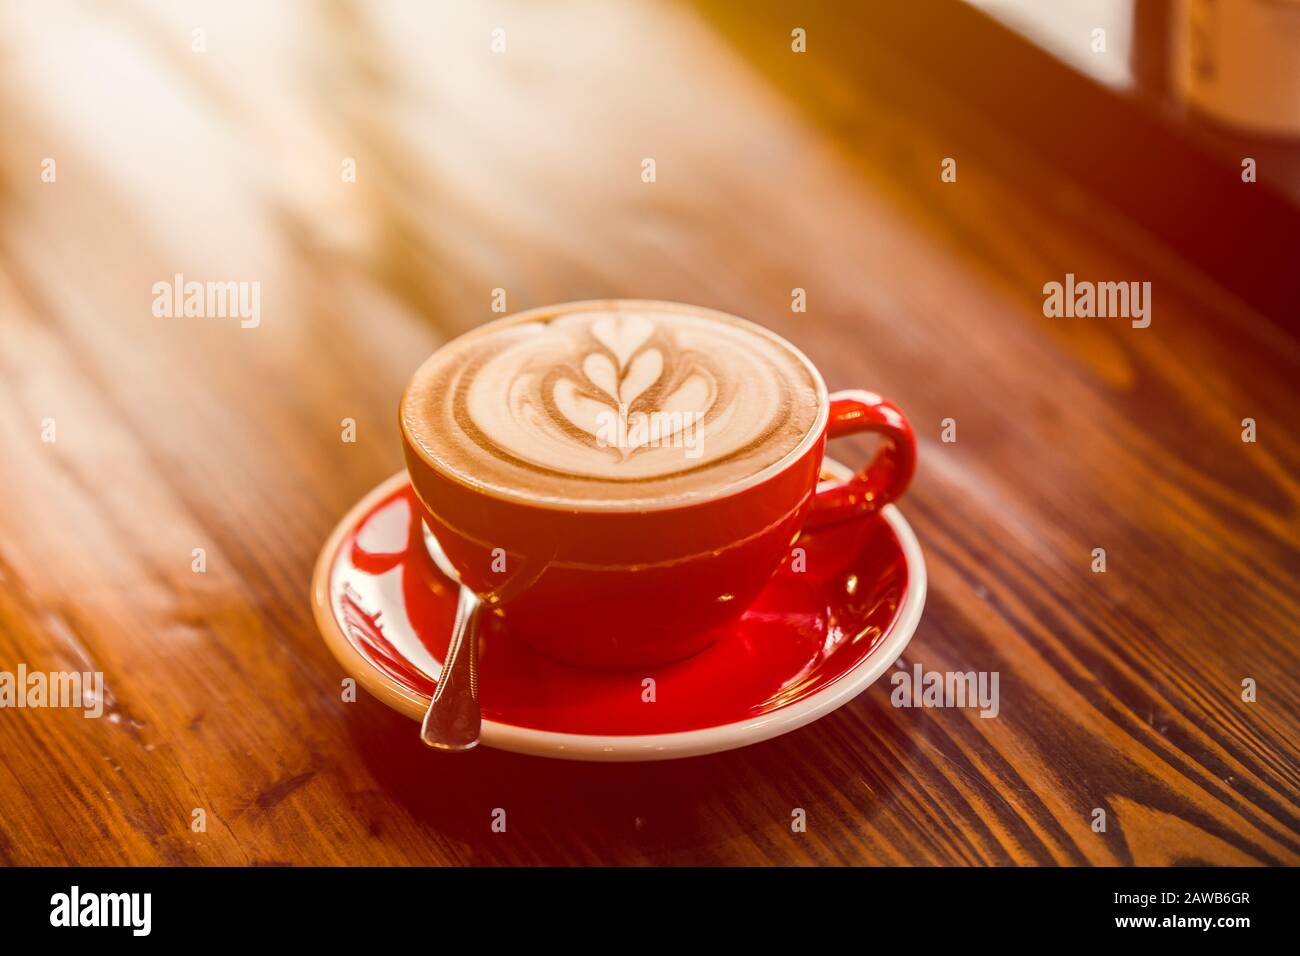 Latte art hot coffee on wooden table in the morning day Stock Photo